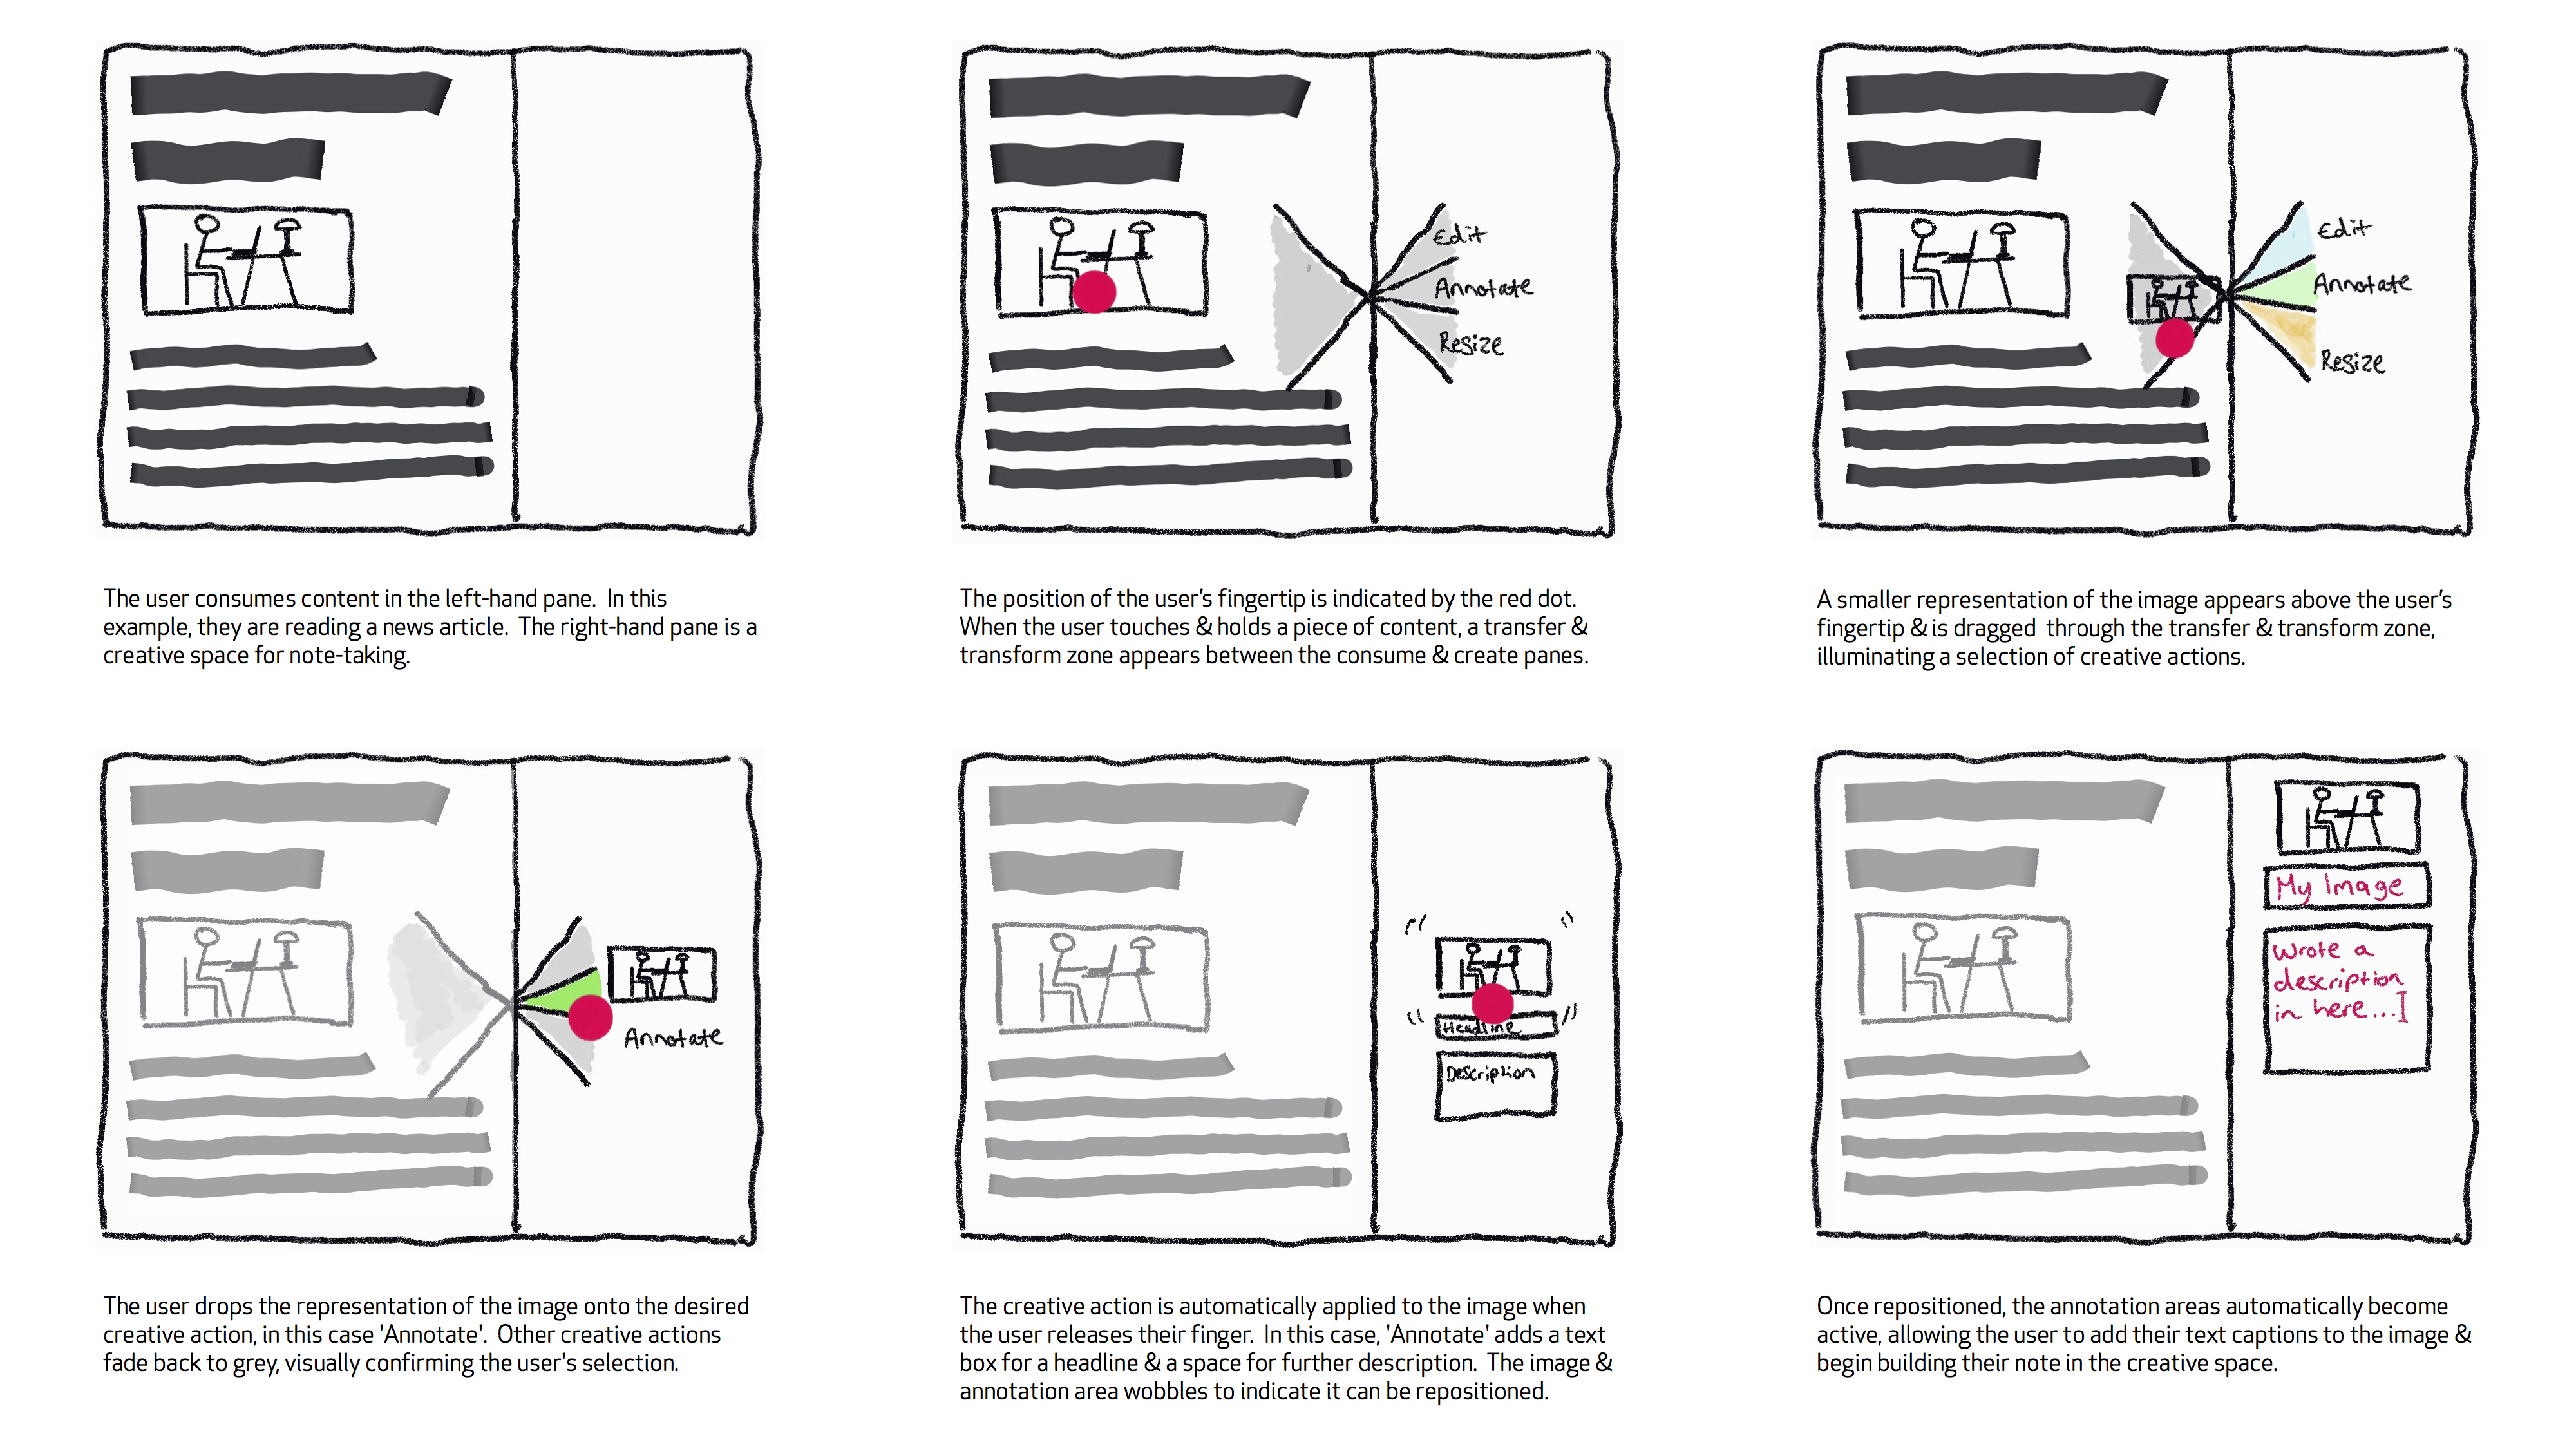 UX concept storyboard for creative transformation at the moment of intersection